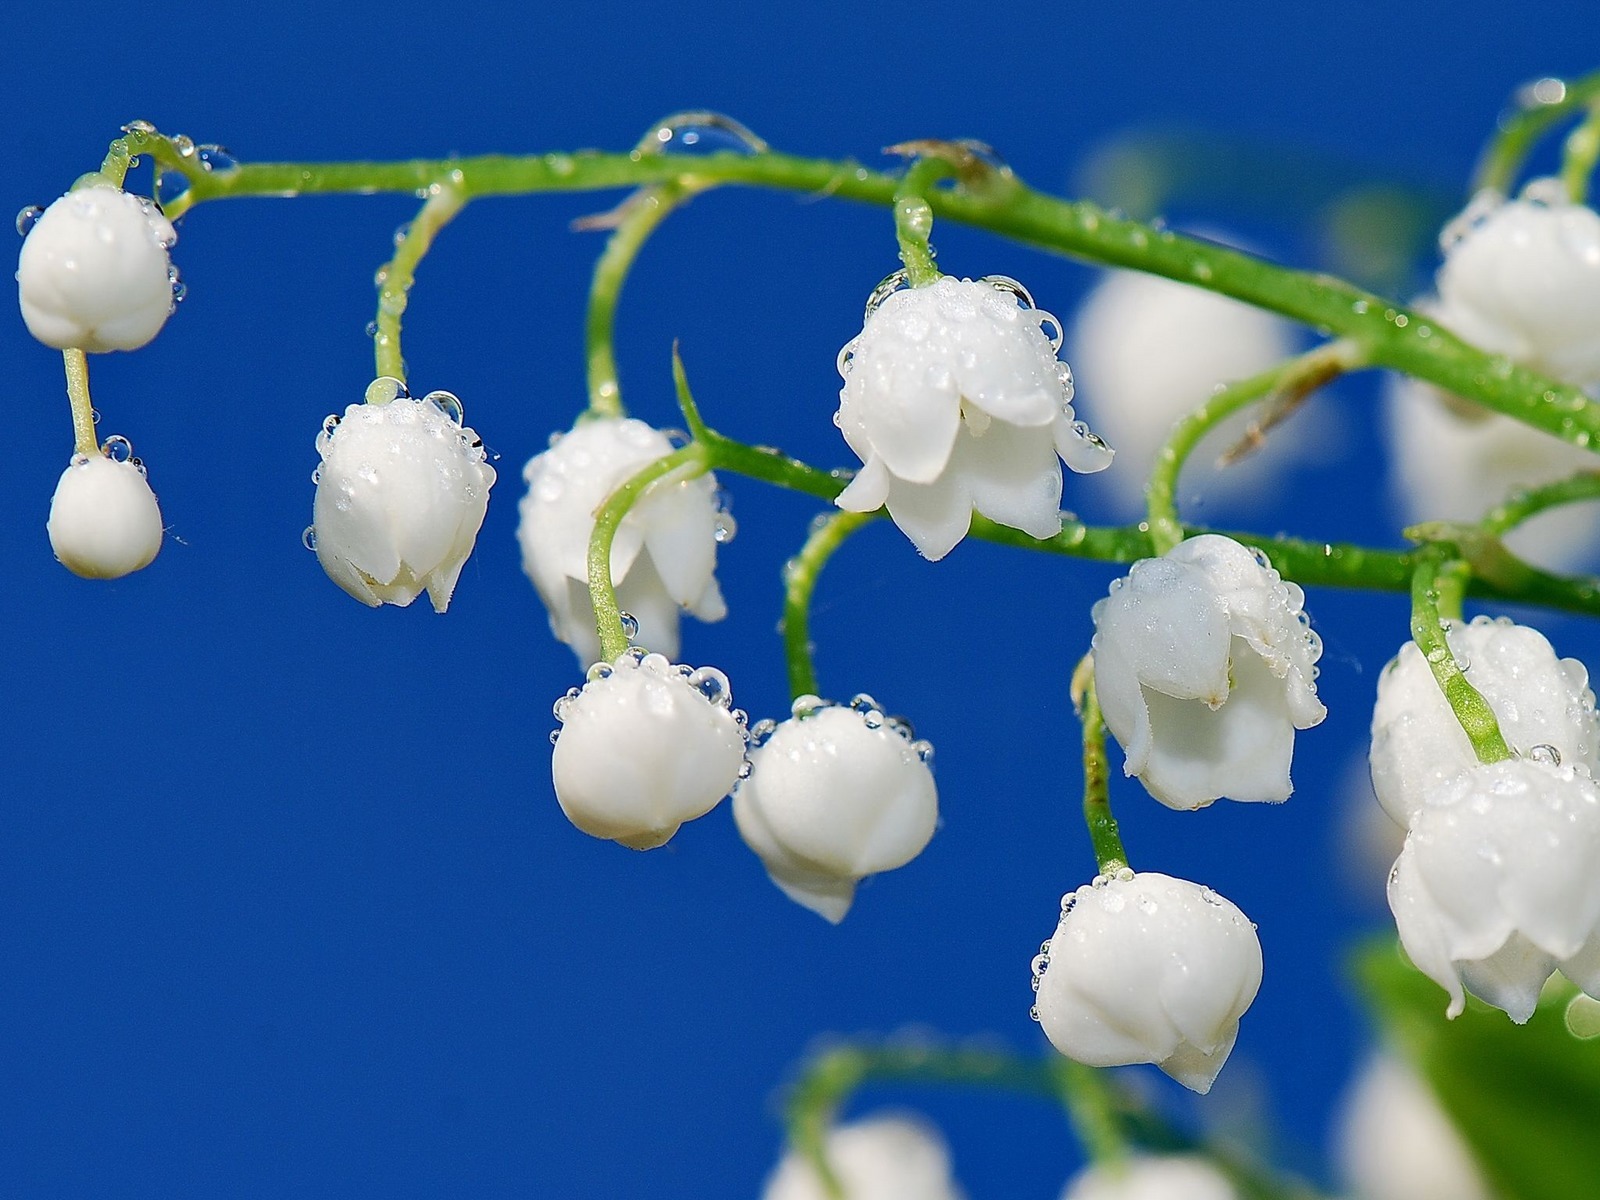 plants, flowers, drops, lily of the valley, blue